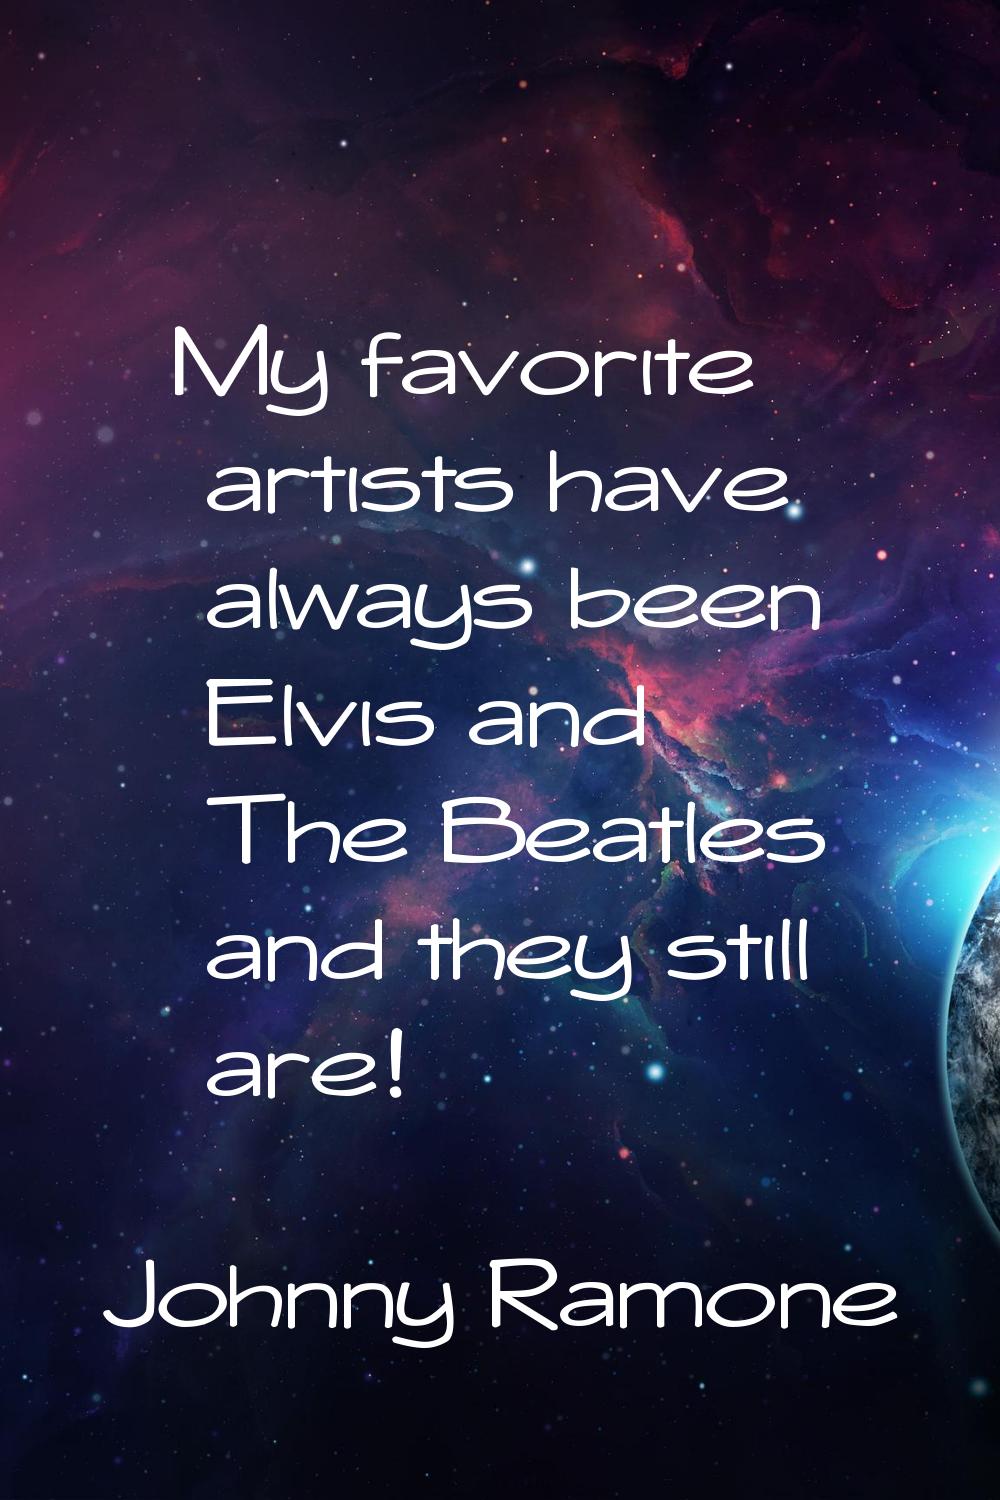 My favorite artists have always been Elvis and The Beatles and they still are!